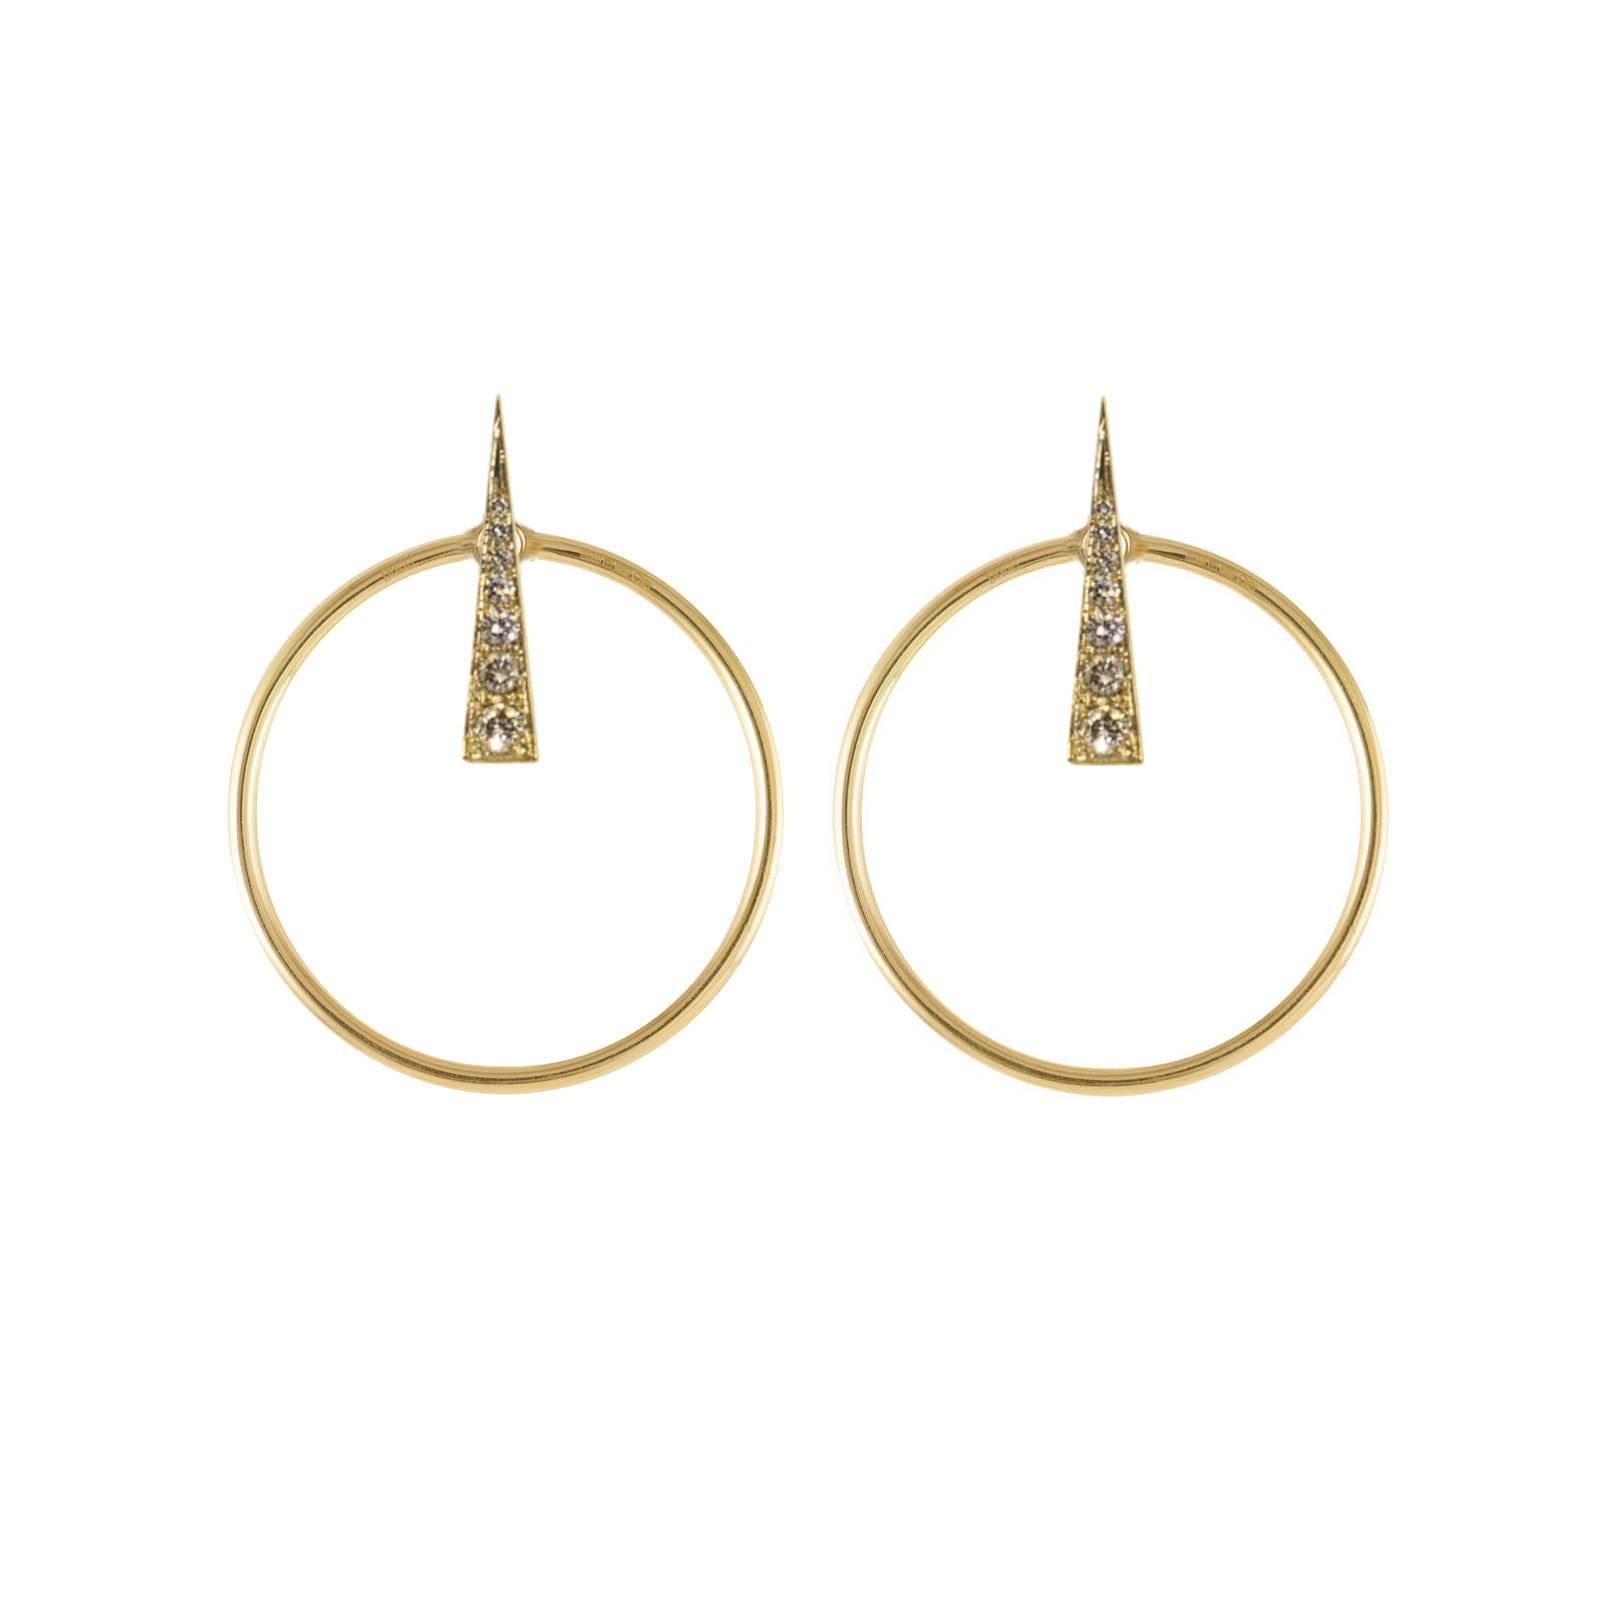 Large Orbit Hoop Multiplier earring jackets in 18 karat yellow gold are an innovative addition to any bar fastening earrings. The front facing hoops slip on to the bar or any earring and immediately create an elegantly balanced hoop frame around the